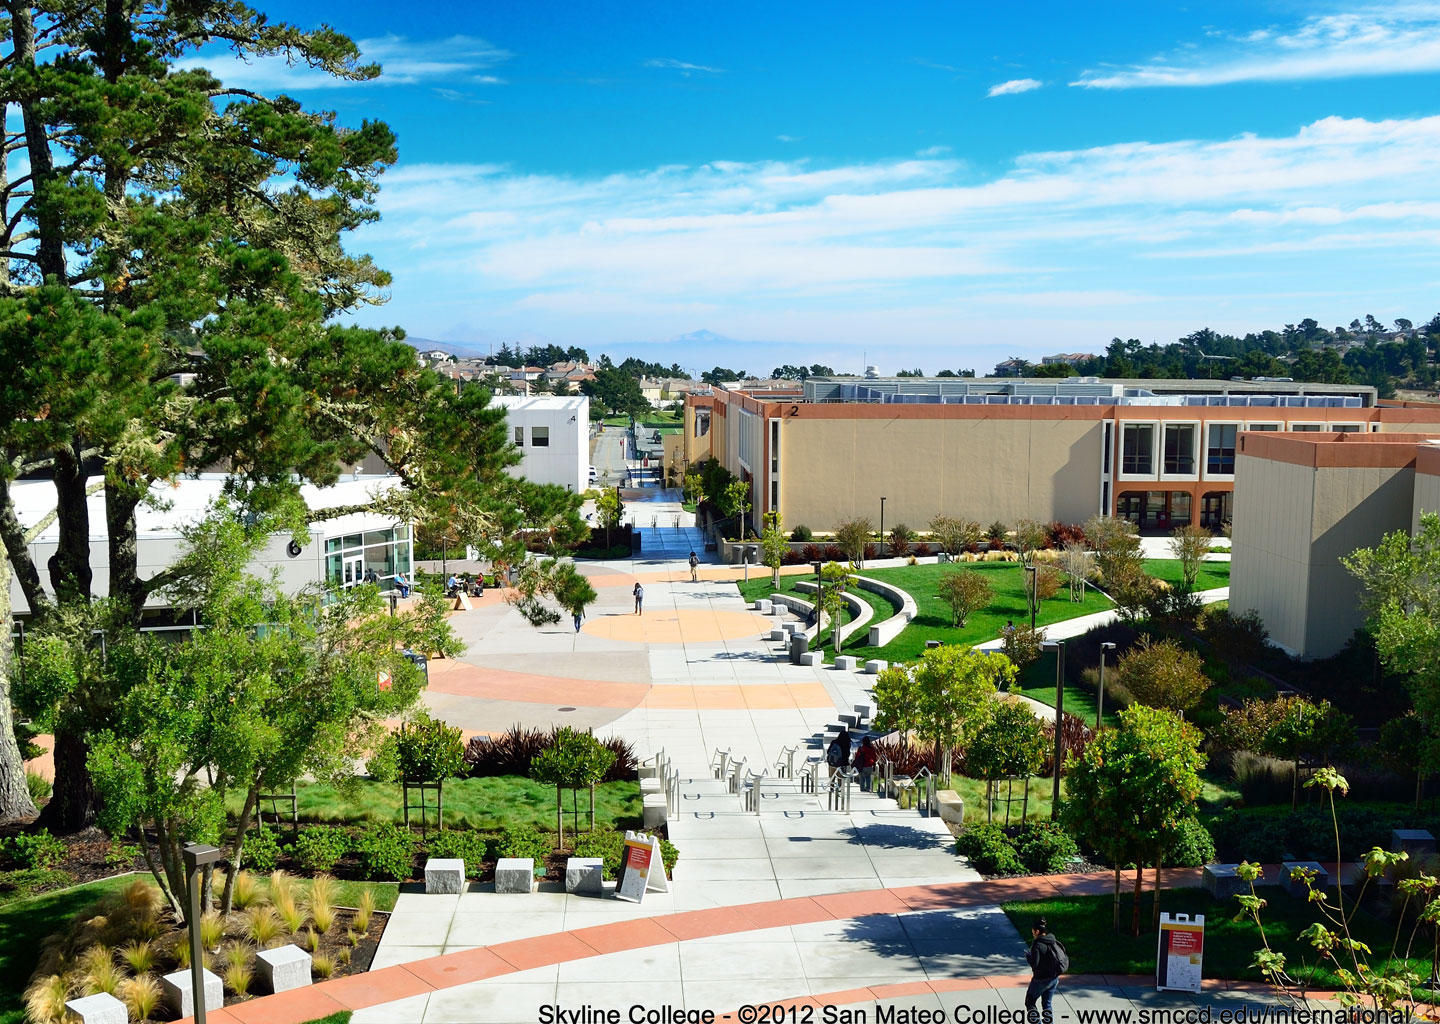 199 Courses Available At San Mateo Colleges Of Silicon Valley In United States The Ranking اي دي بي السعودية